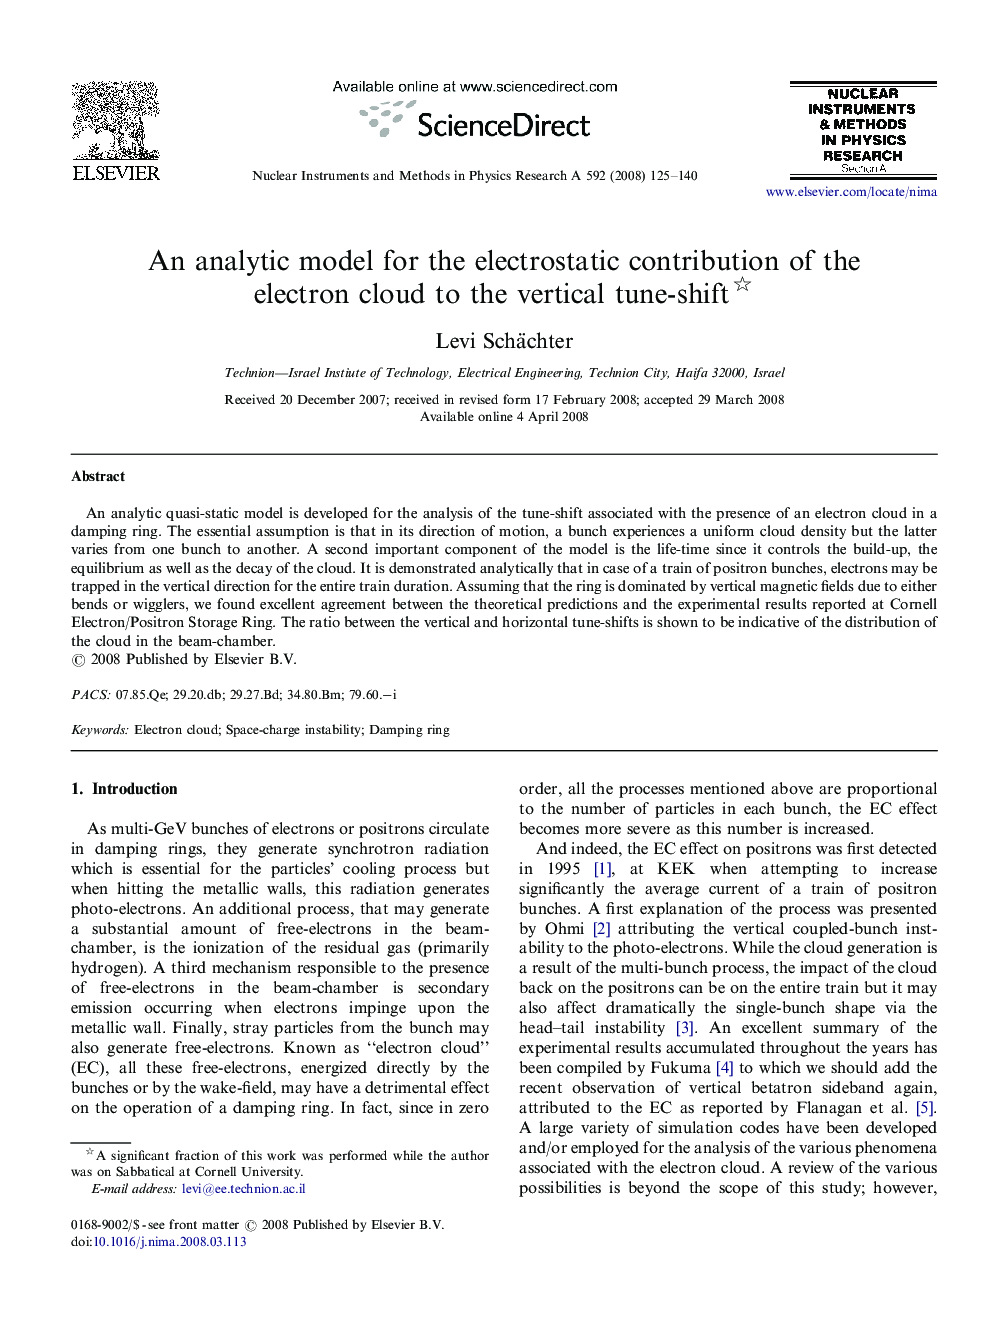 An analytic model for the electrostatic contribution of the electron cloud to the vertical tune-shift 